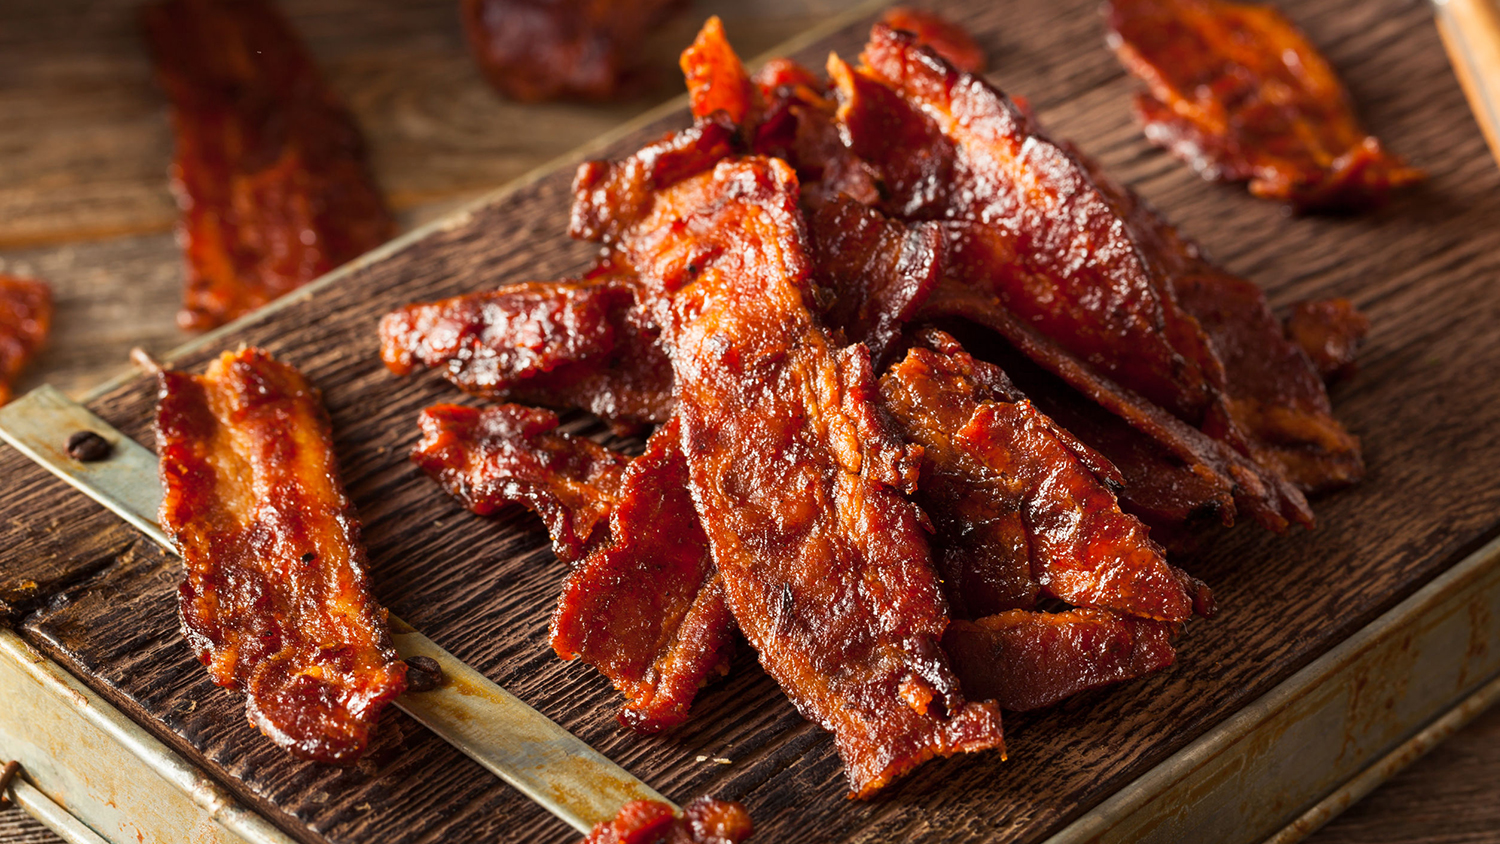 https://www.themanual.com/wp-content/uploads/sites/9/2017/10/bacon-jerky.jpg?fit=1500%2C844&p=1